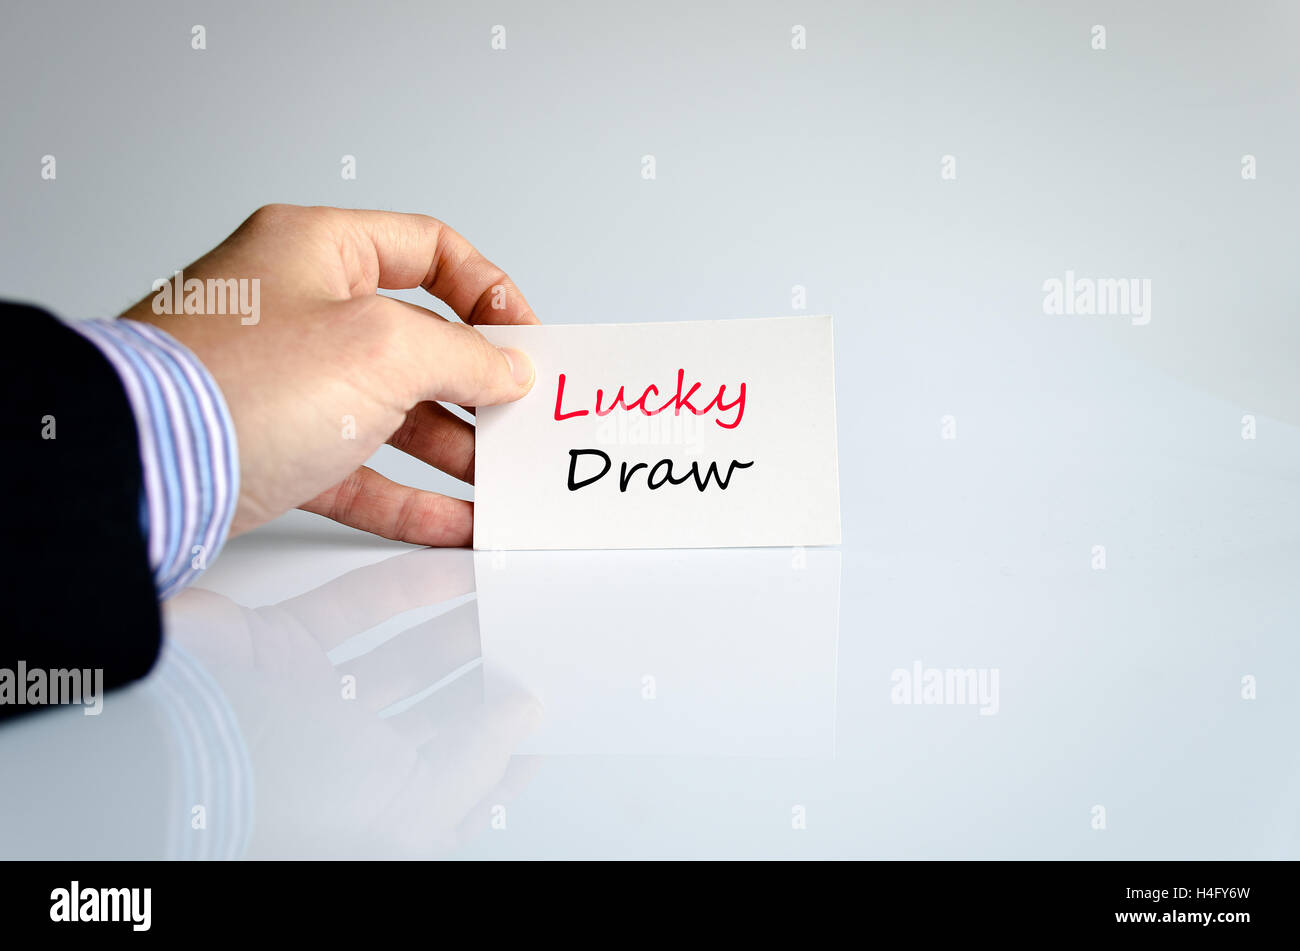 Lucky draw text concept isolated over white background Stock Photo - Alamy